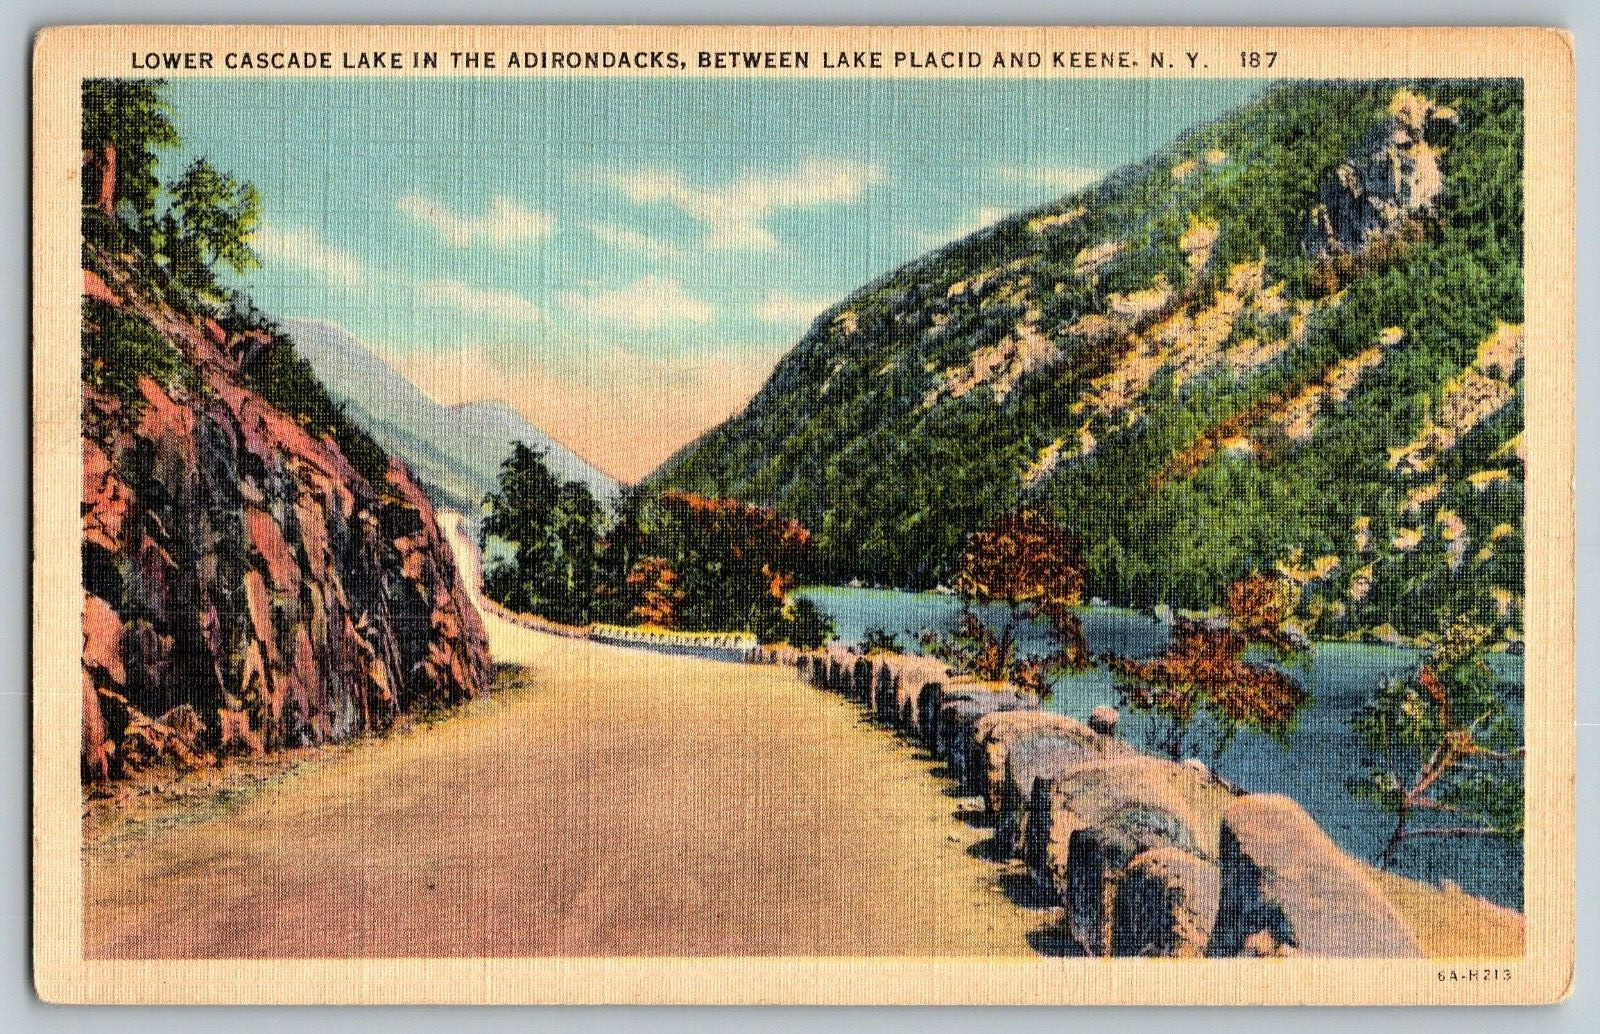 New York - Lower Cascade Lake in Adirondacks  - Vintage Postcards - Posted 1949